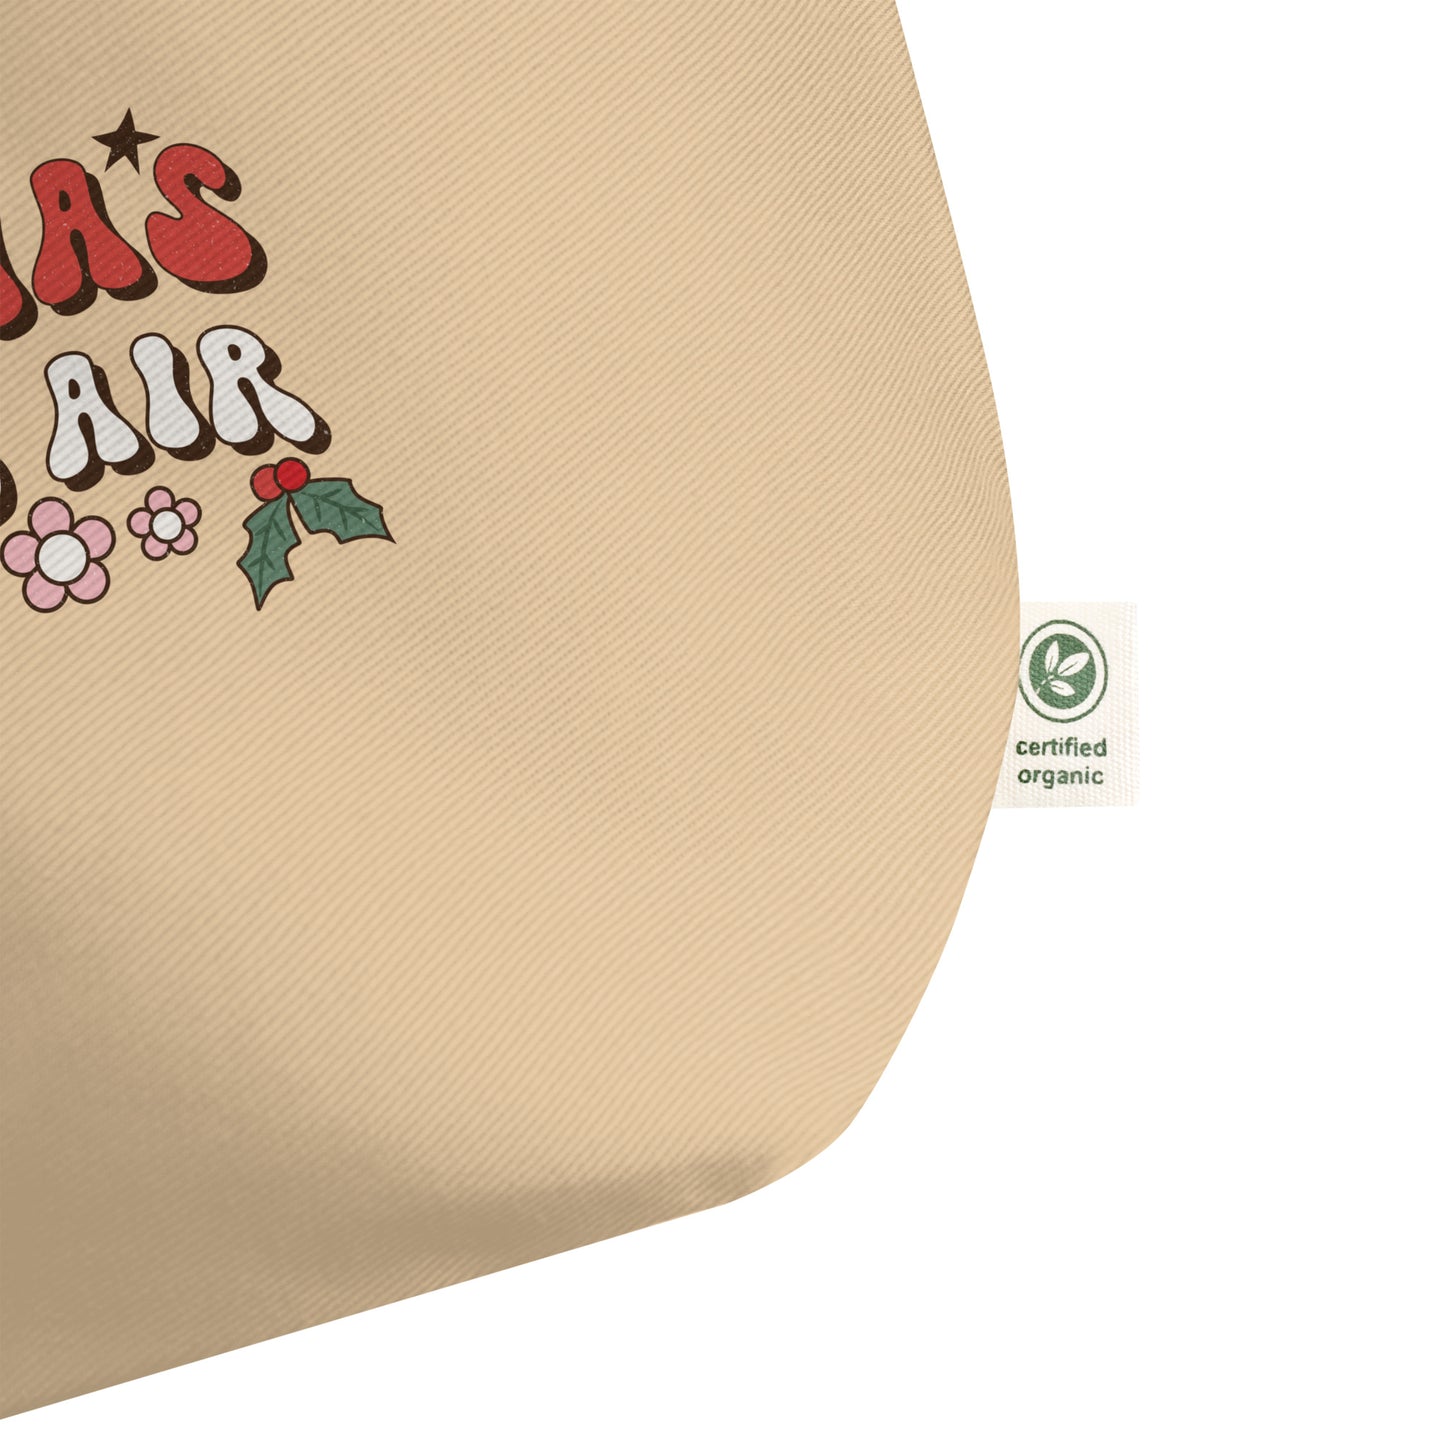 Christmas is in the Air Large organic tote bag